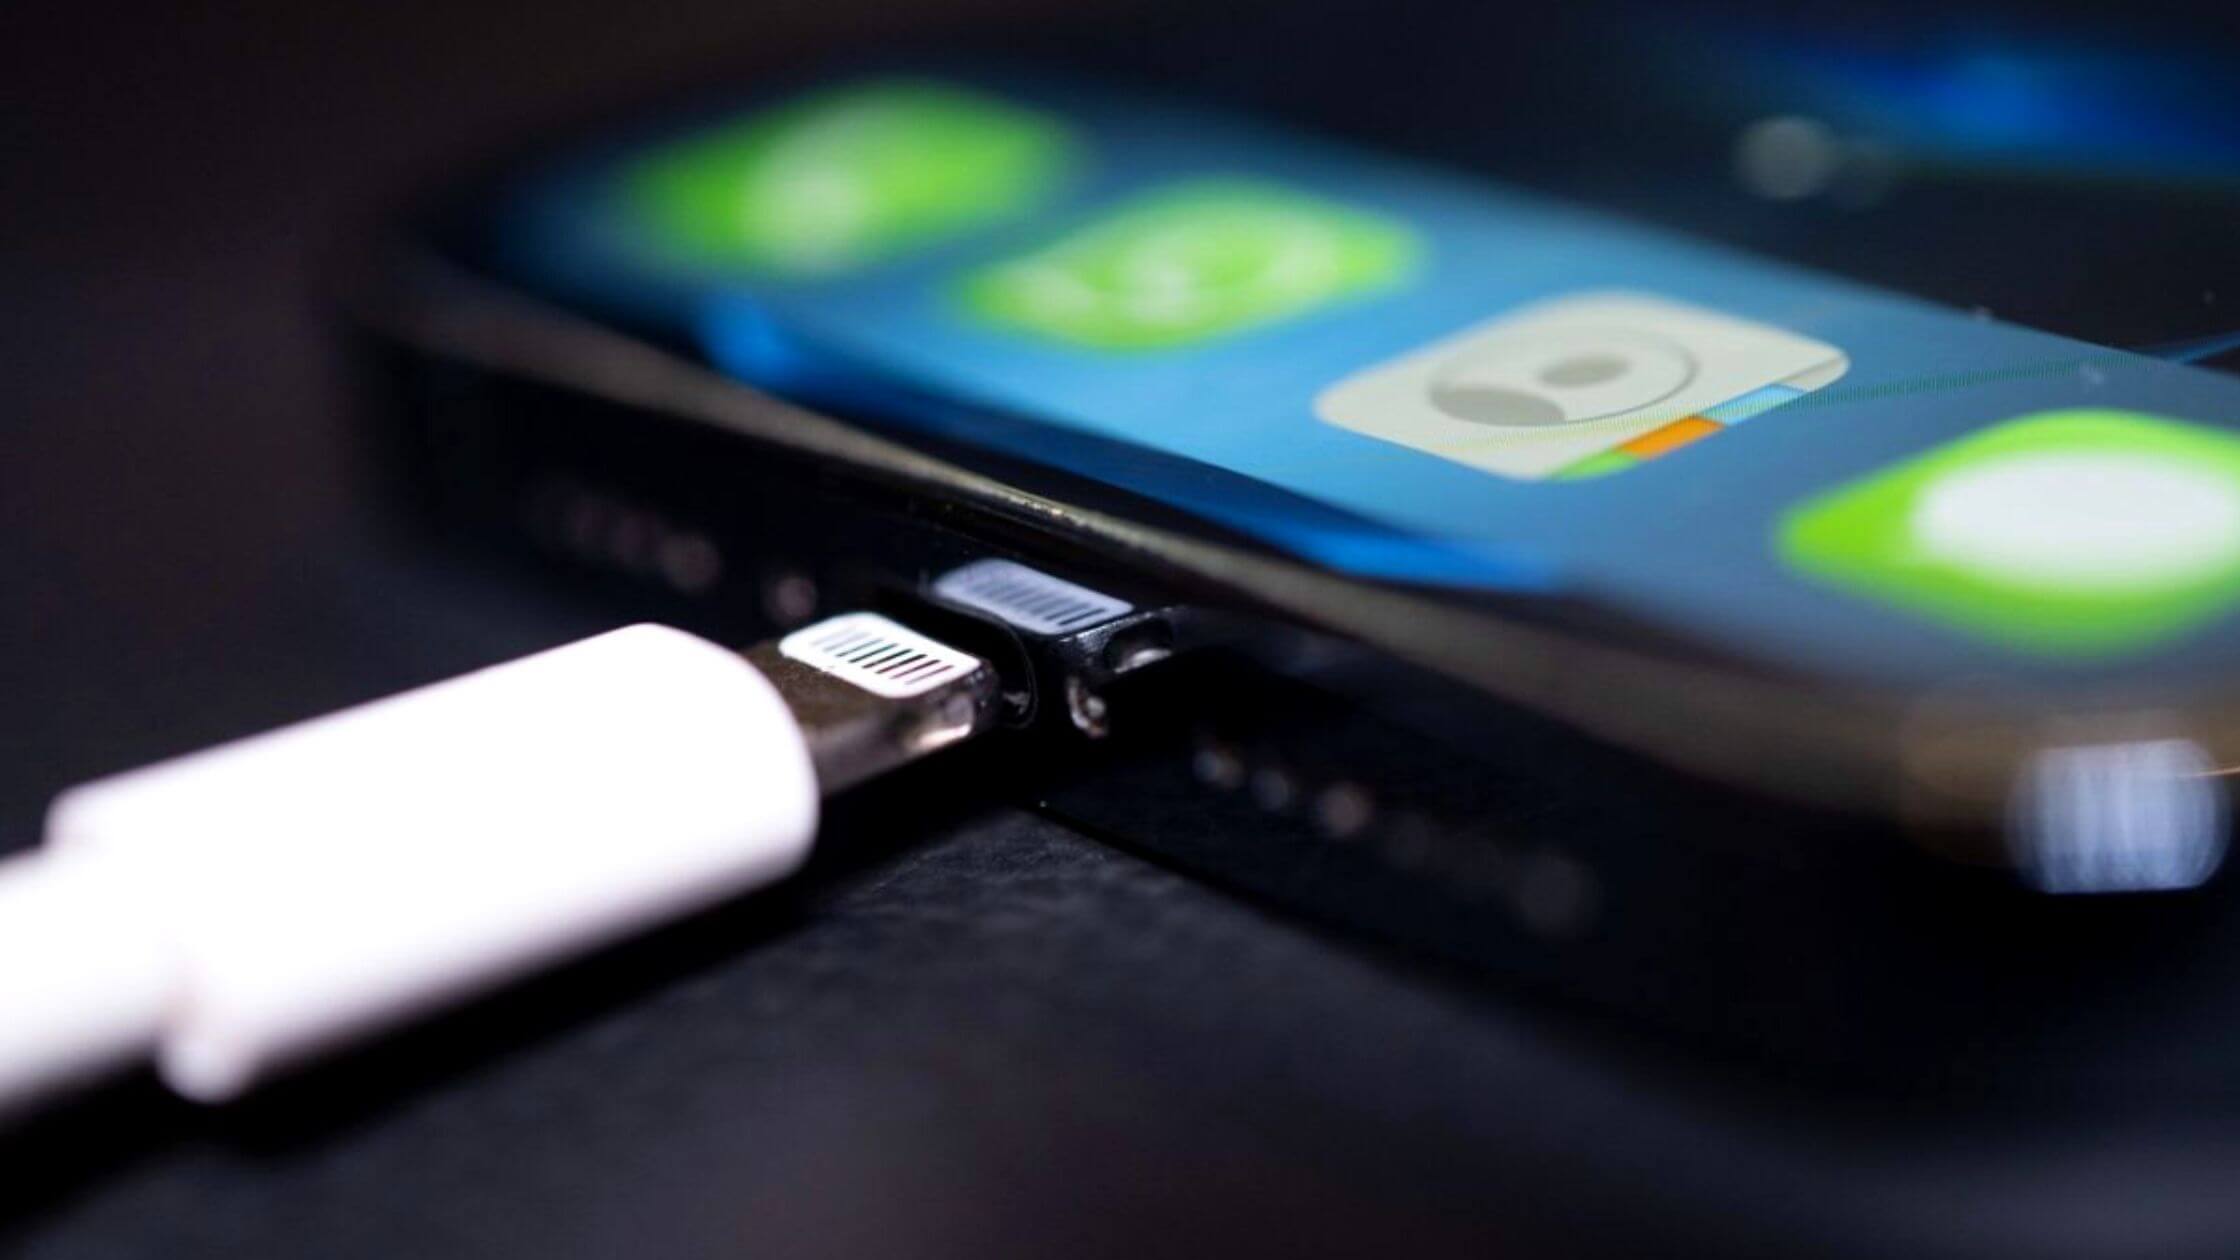 Apple's Next iPhone Launched With An USB-C Charging